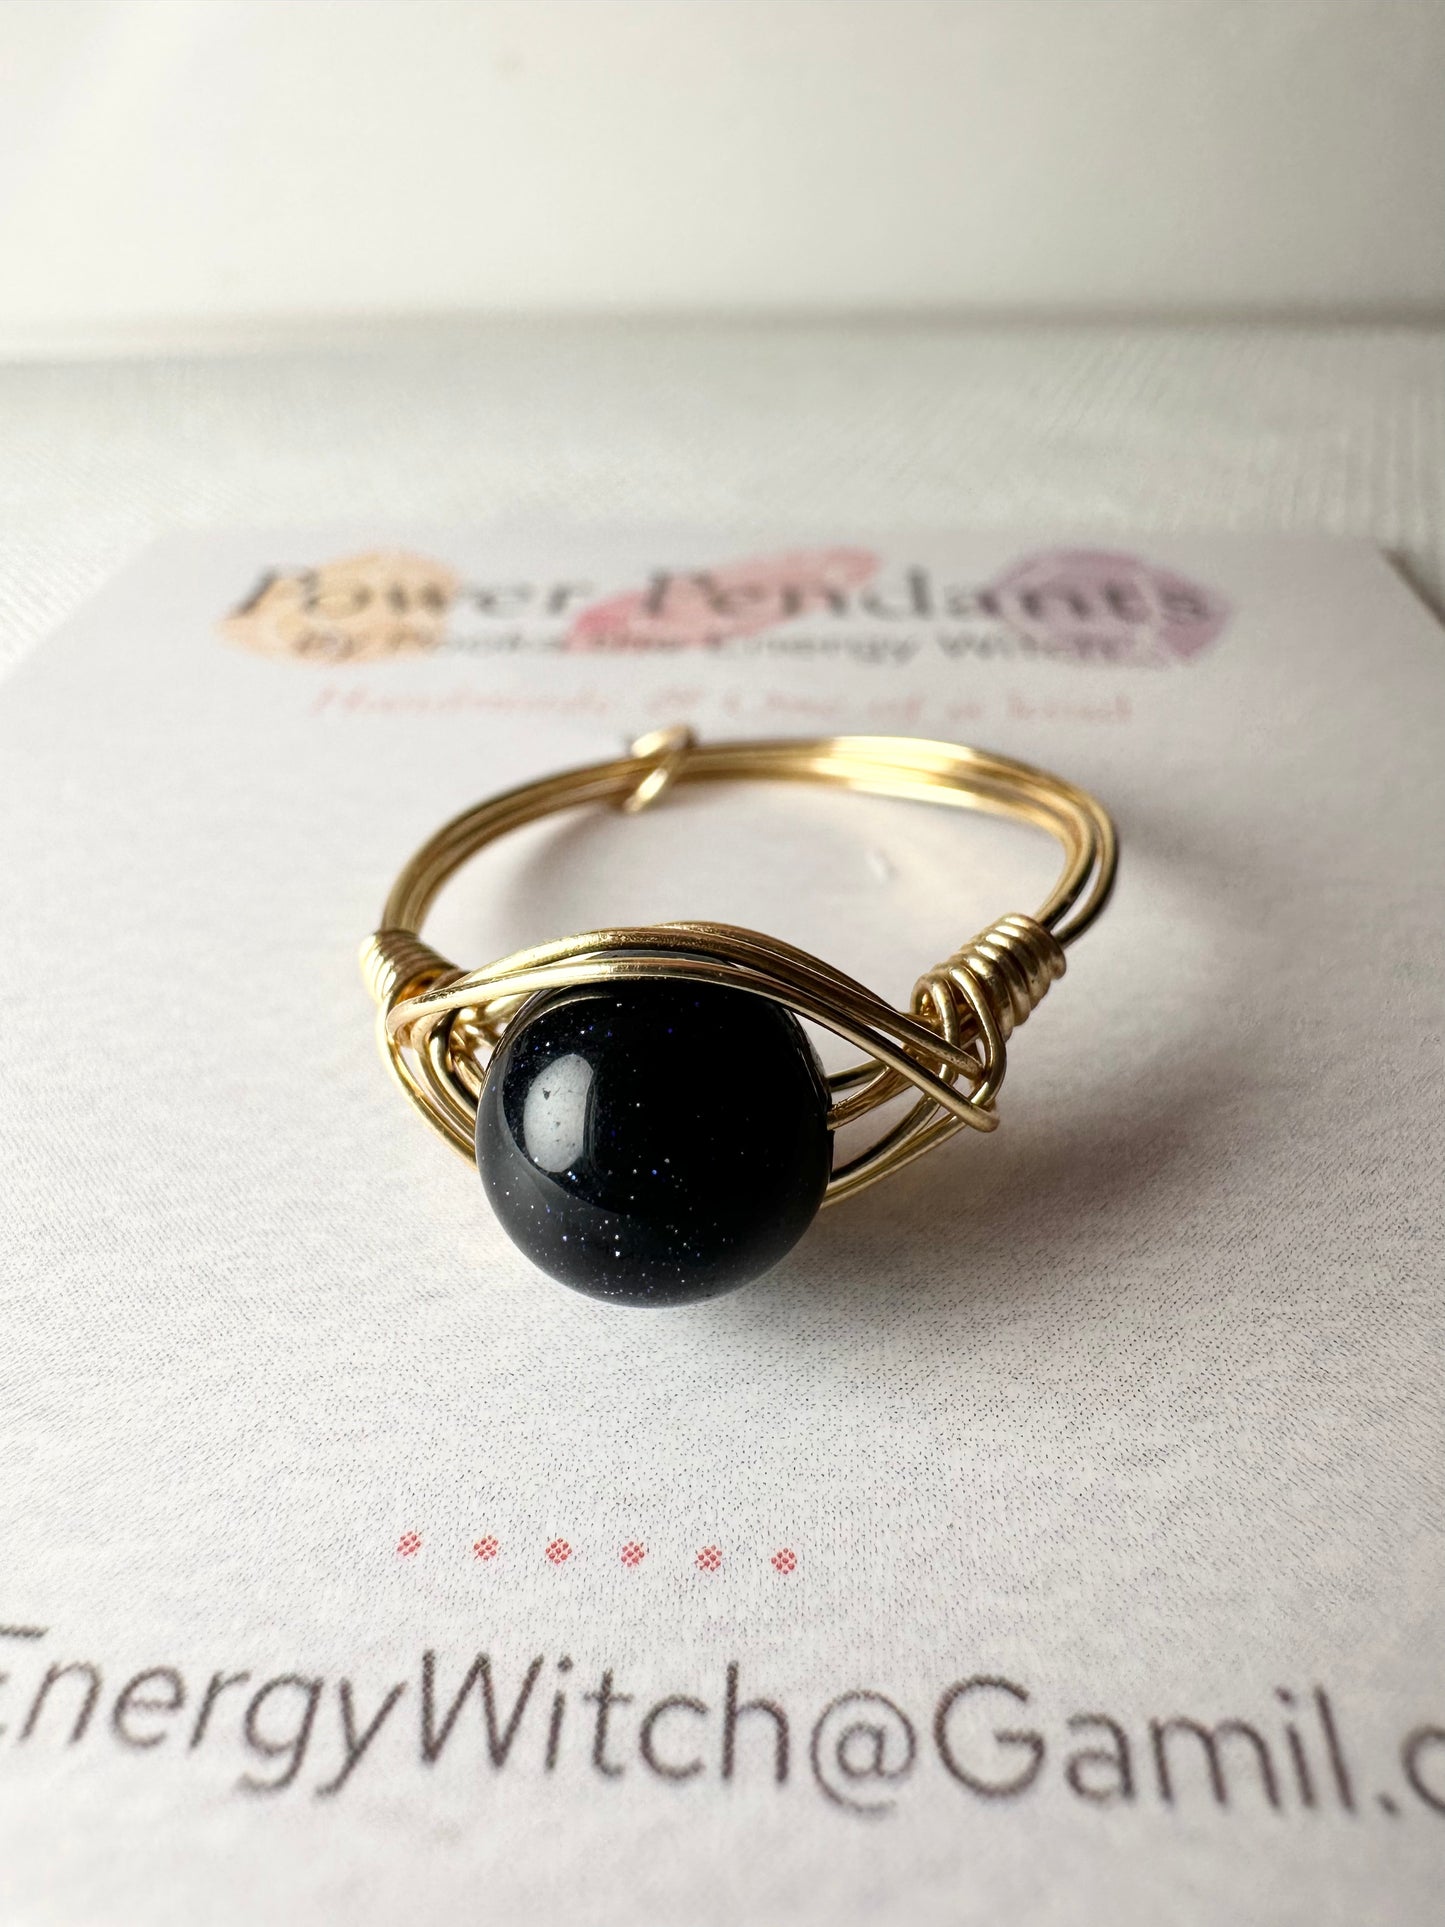 Pooka the Energy Witch - Wire Wrap Ring - Gold Colored Wrap  - Blue Sandstone